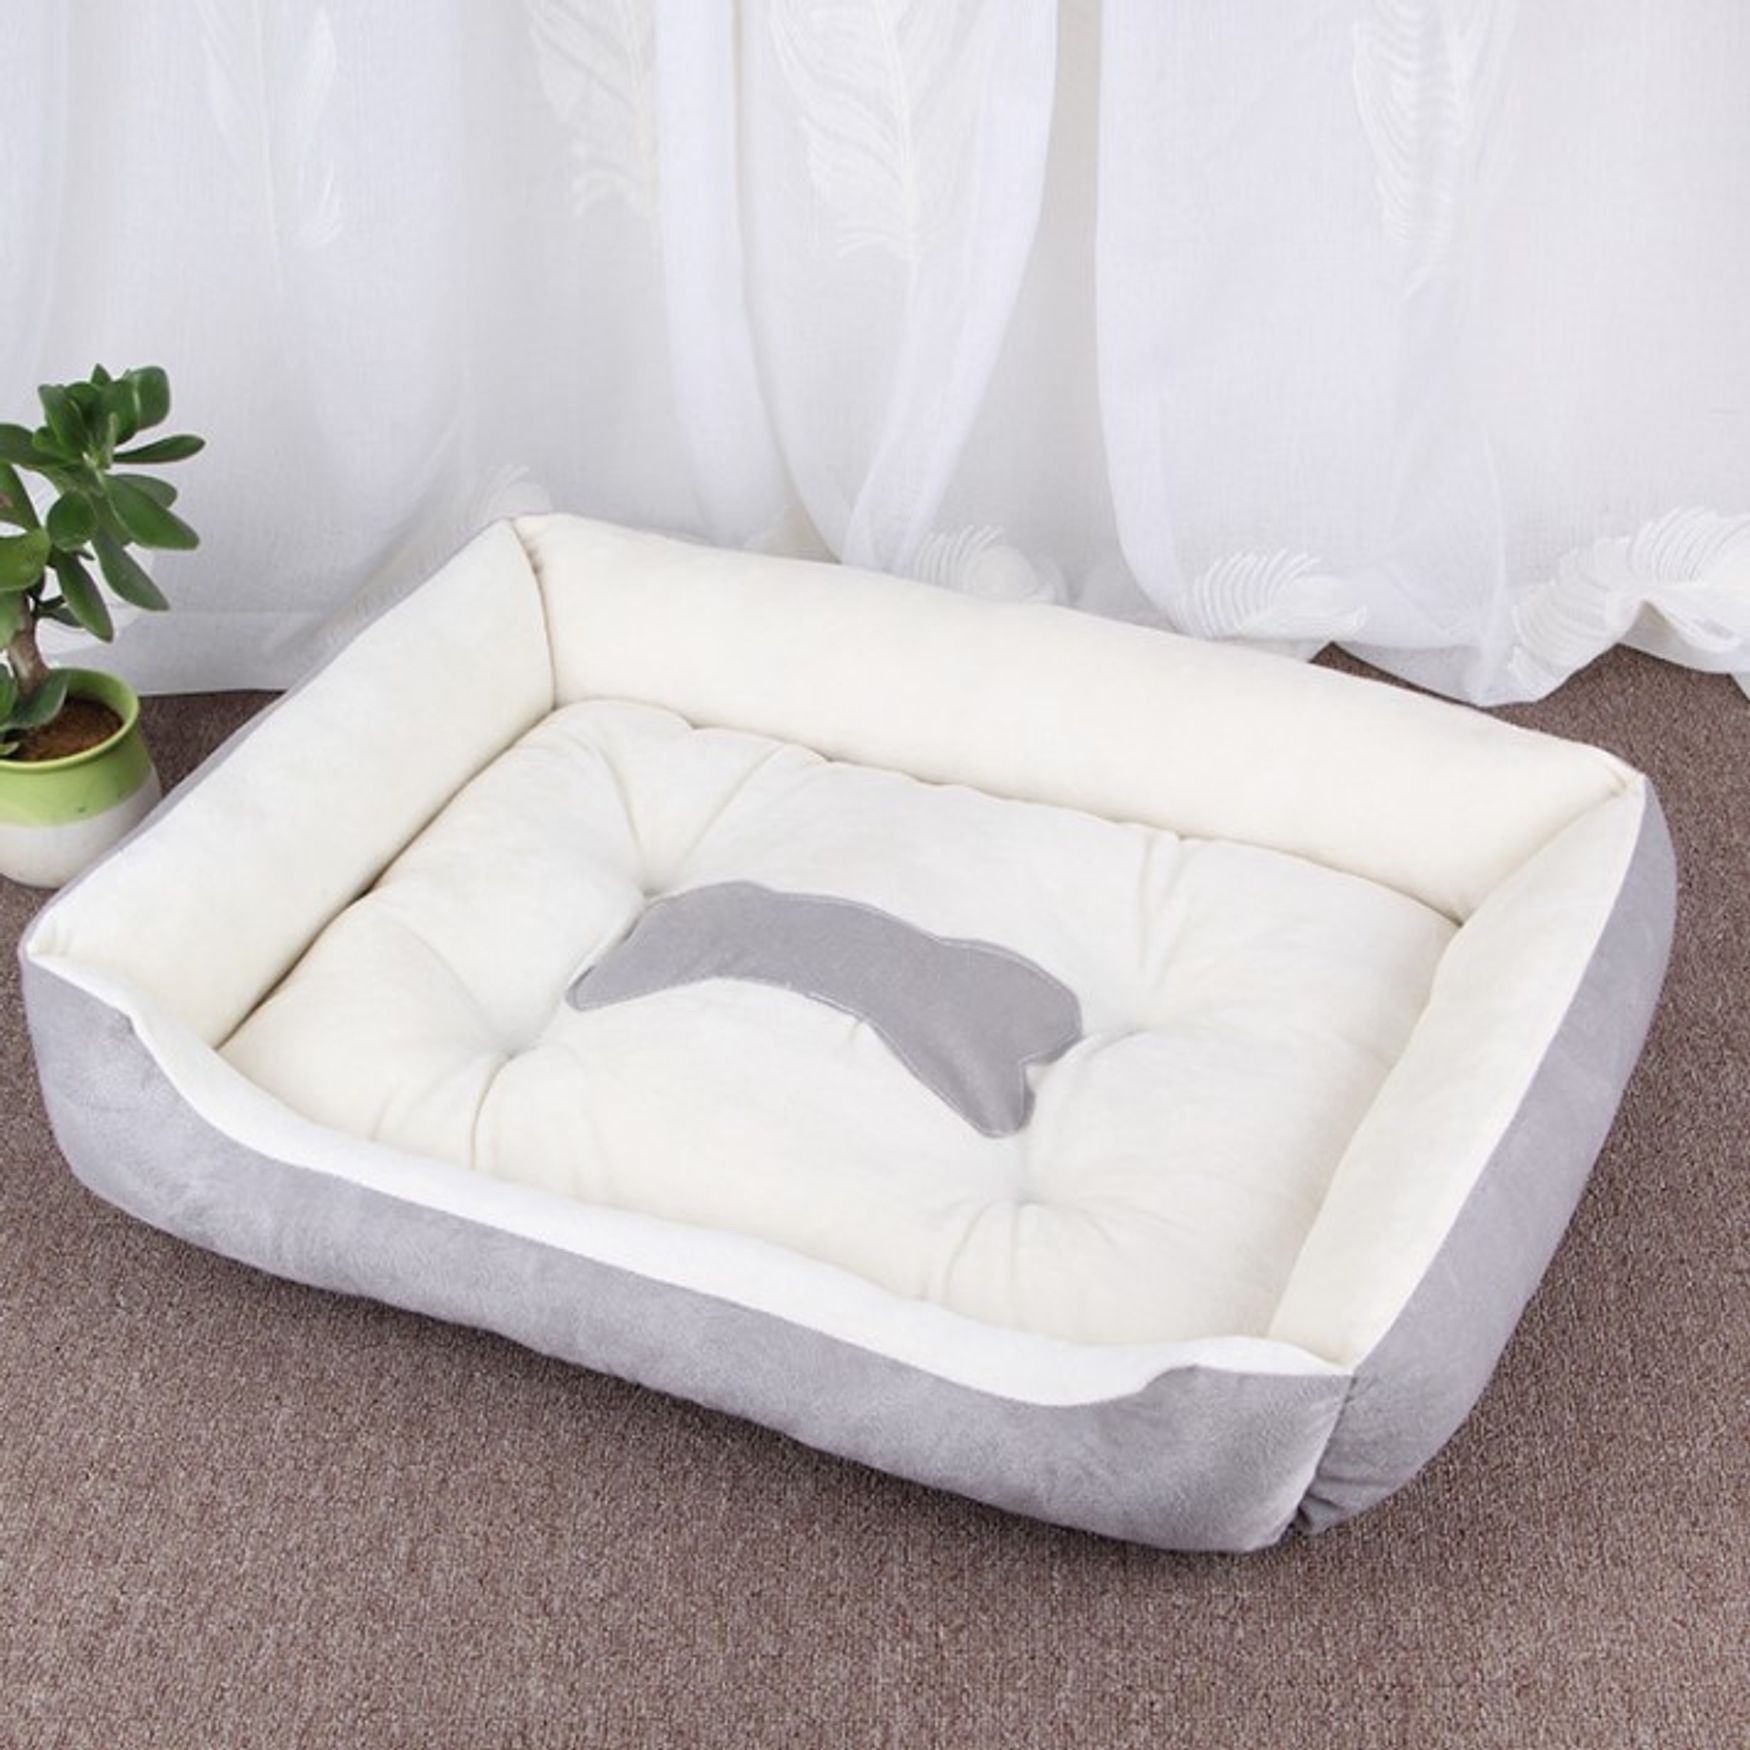 Dog Bed (White and Gray) With Gray Bone Silhouette, 